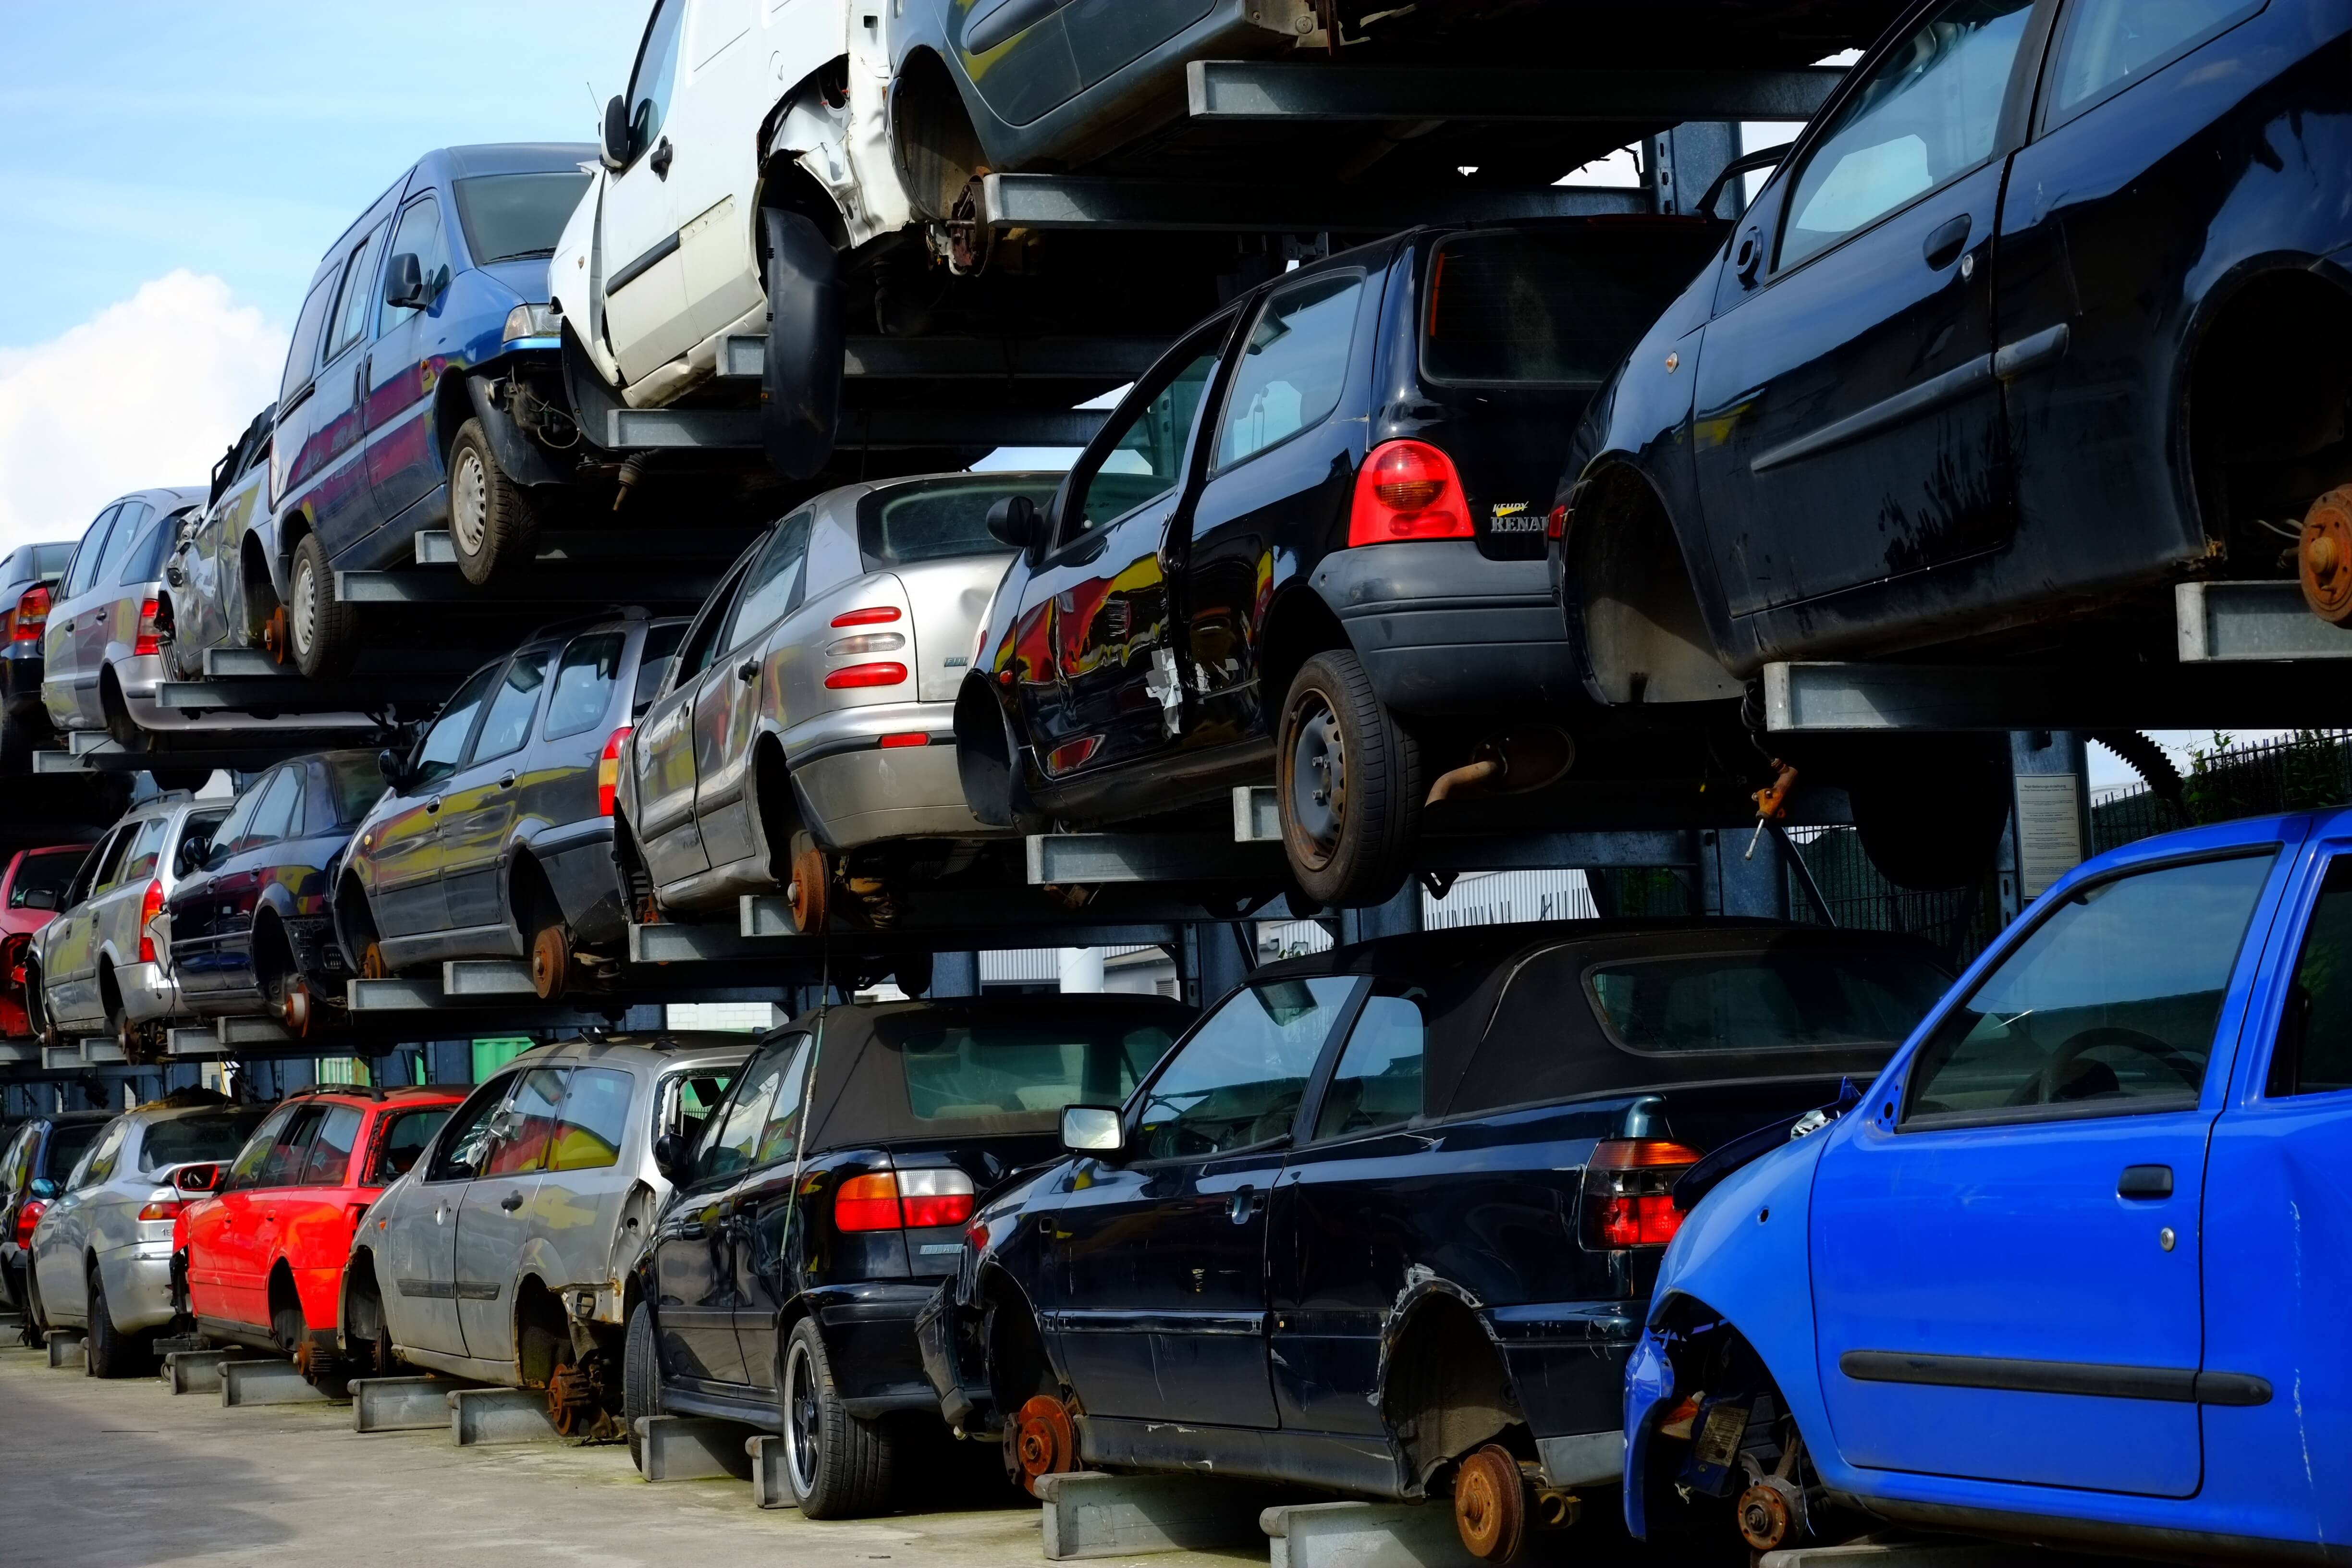 Sell Used Car in Mississauga Want to sell or recycle your old car in Mississauga? Canadian Auto Wreckers offers scrap car removal services in Mississauga. Visit the website for more details. https://canadianautowreckers.ca/services/scrap-car-removal-mississauga/ by canadianautowreckers